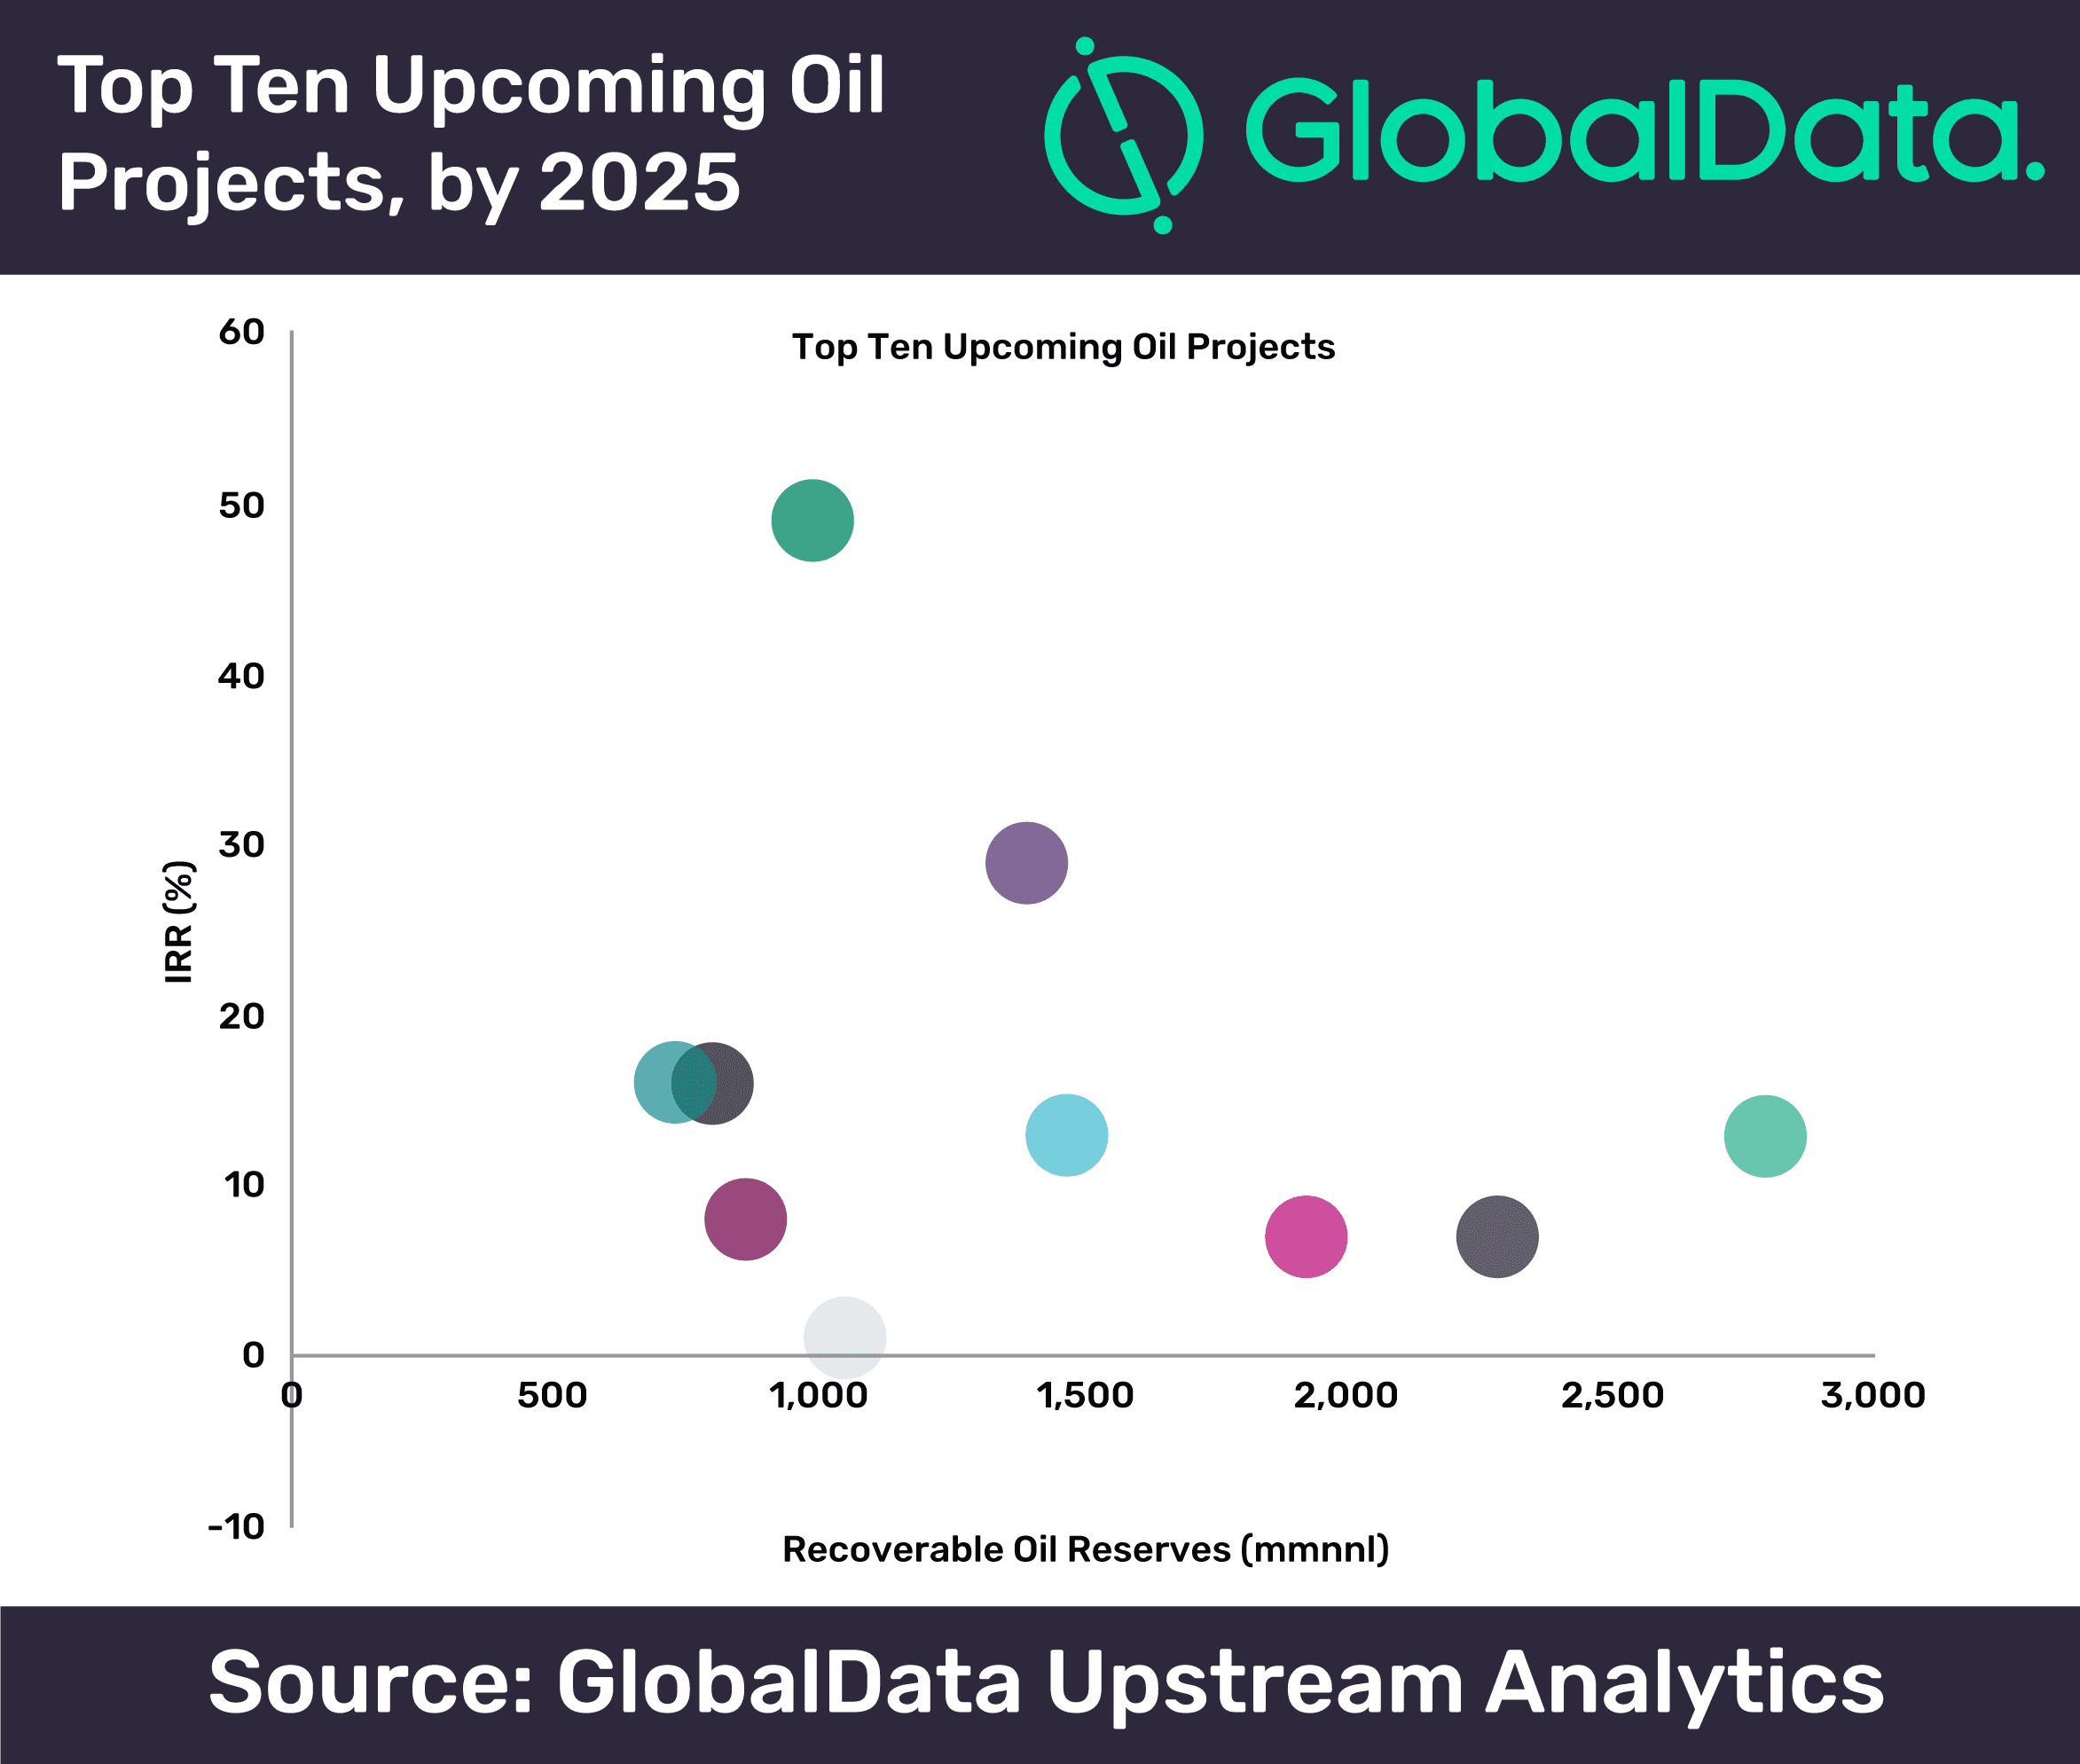 Investment of $97 Billion on Top Ten Offshore Oil Projects to Add Over 1.6 Million barrels per day by 2025